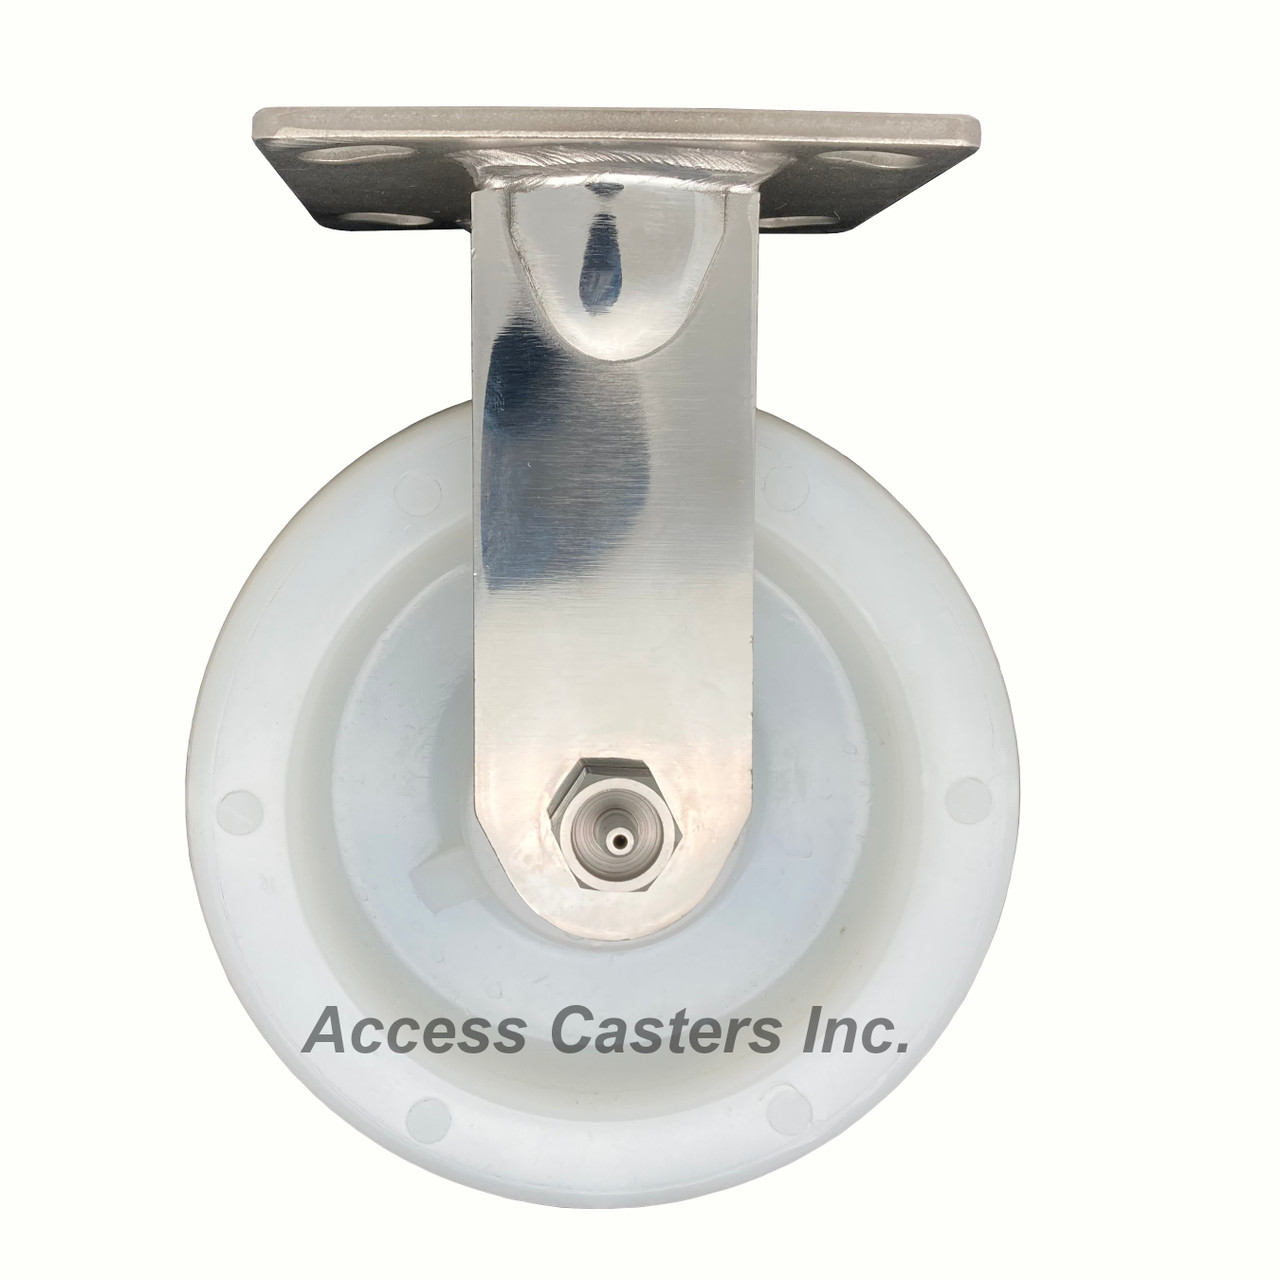 MD316NY6-R 6 Inch 316 Stainless Steel Rigid Caster with White Nylon Wheel